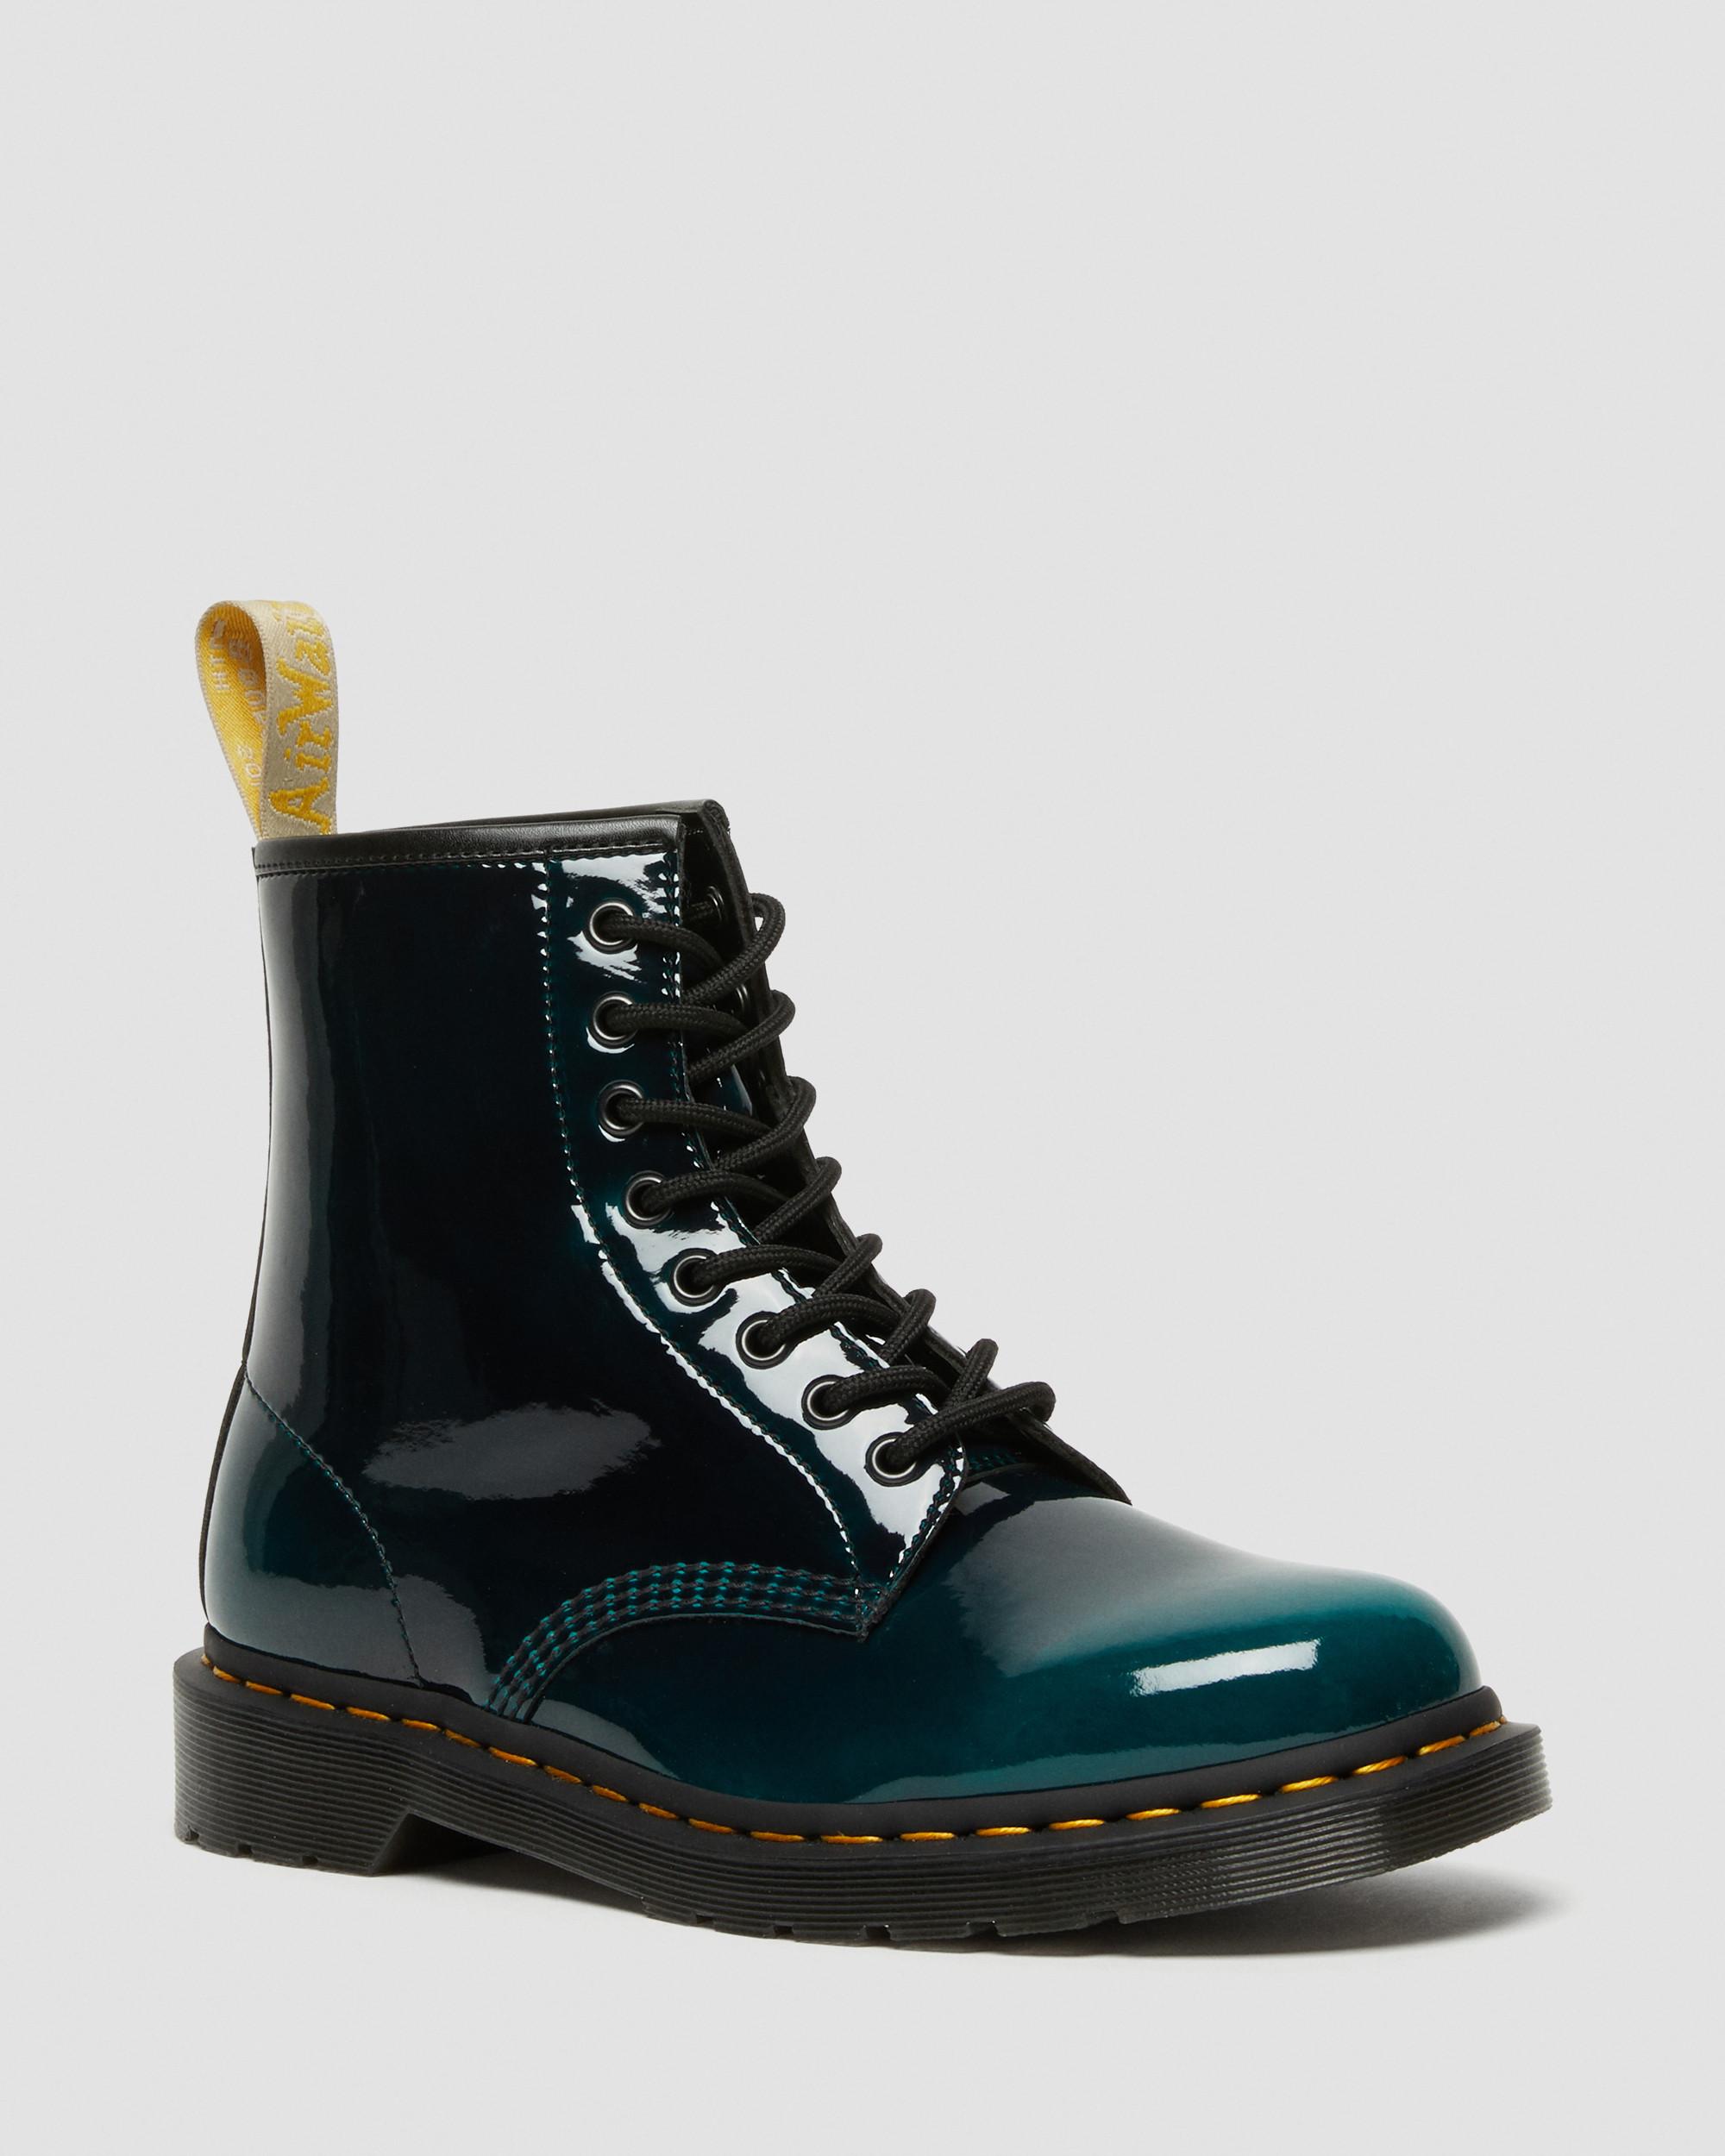 Vegan 1460 Gloss Ankle Boots | Dr. Martens